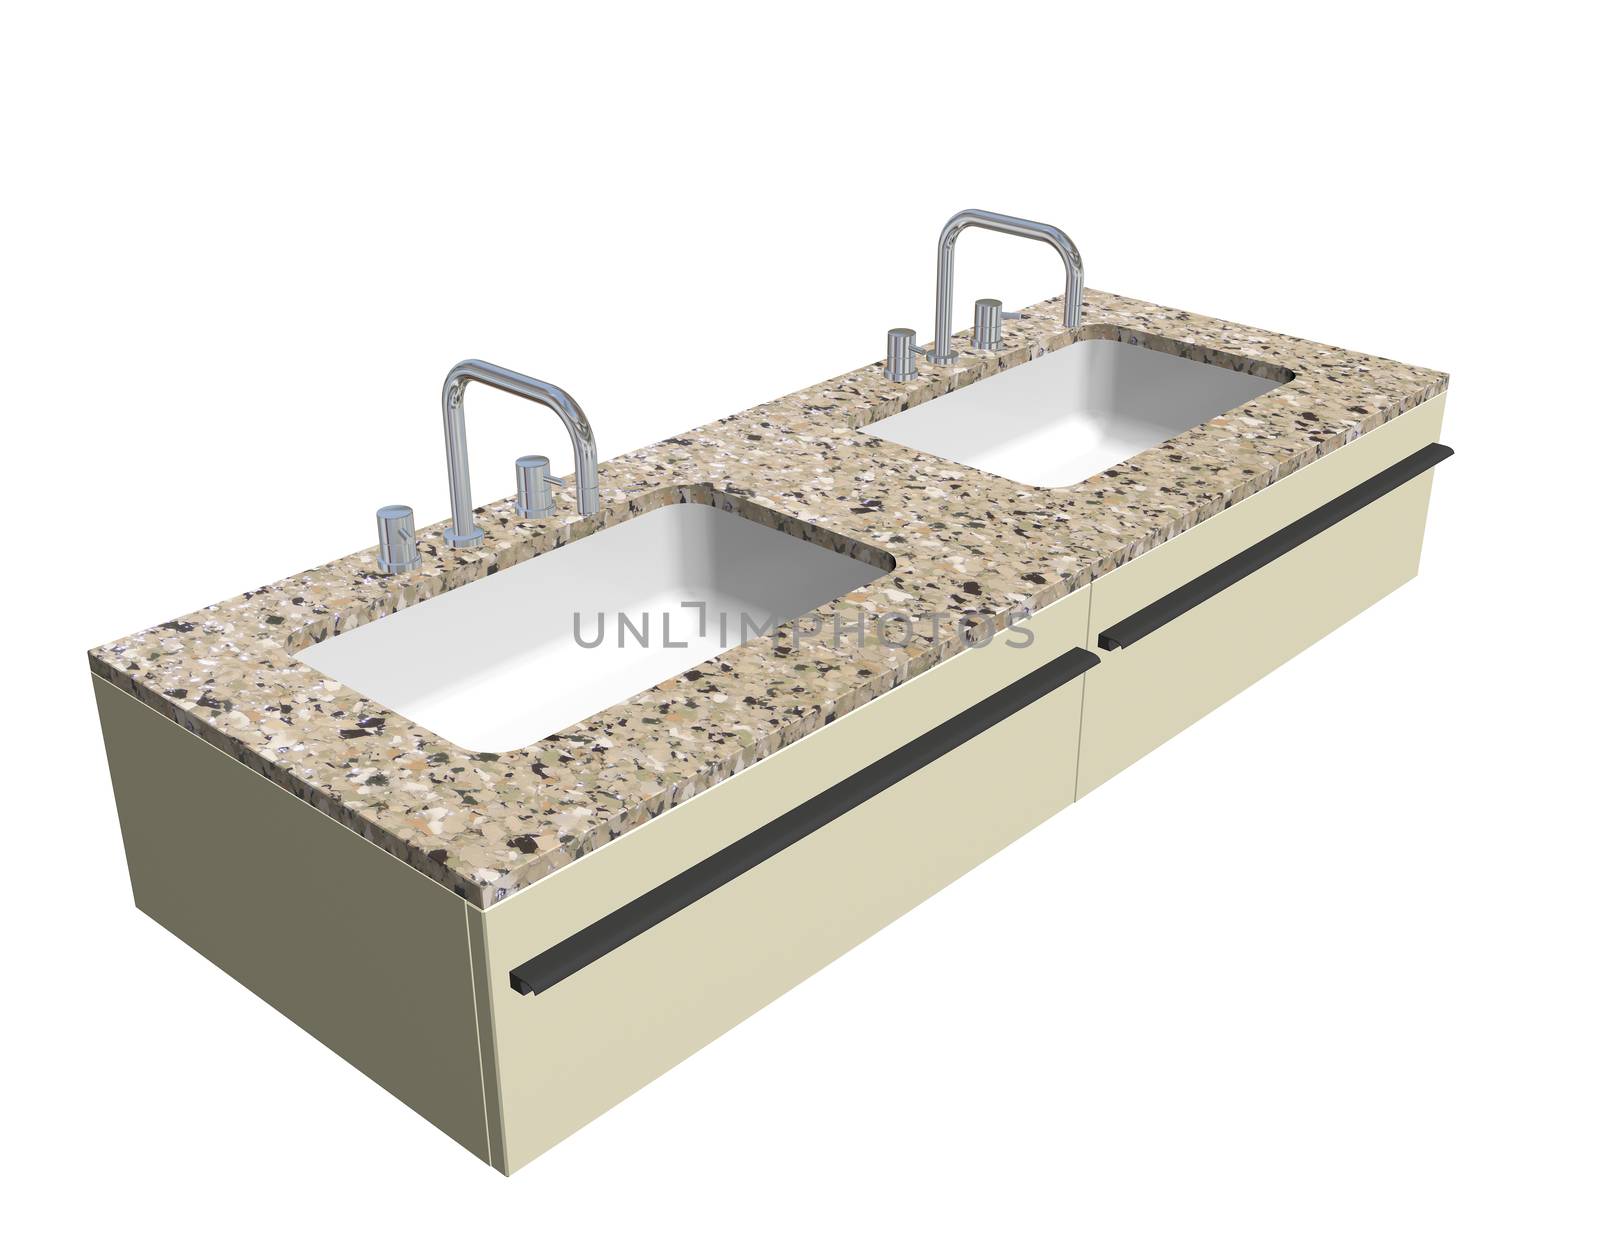 Modern washroom sink set with granite counter and chrome fixtures, 3d illustration, isolated against a white background